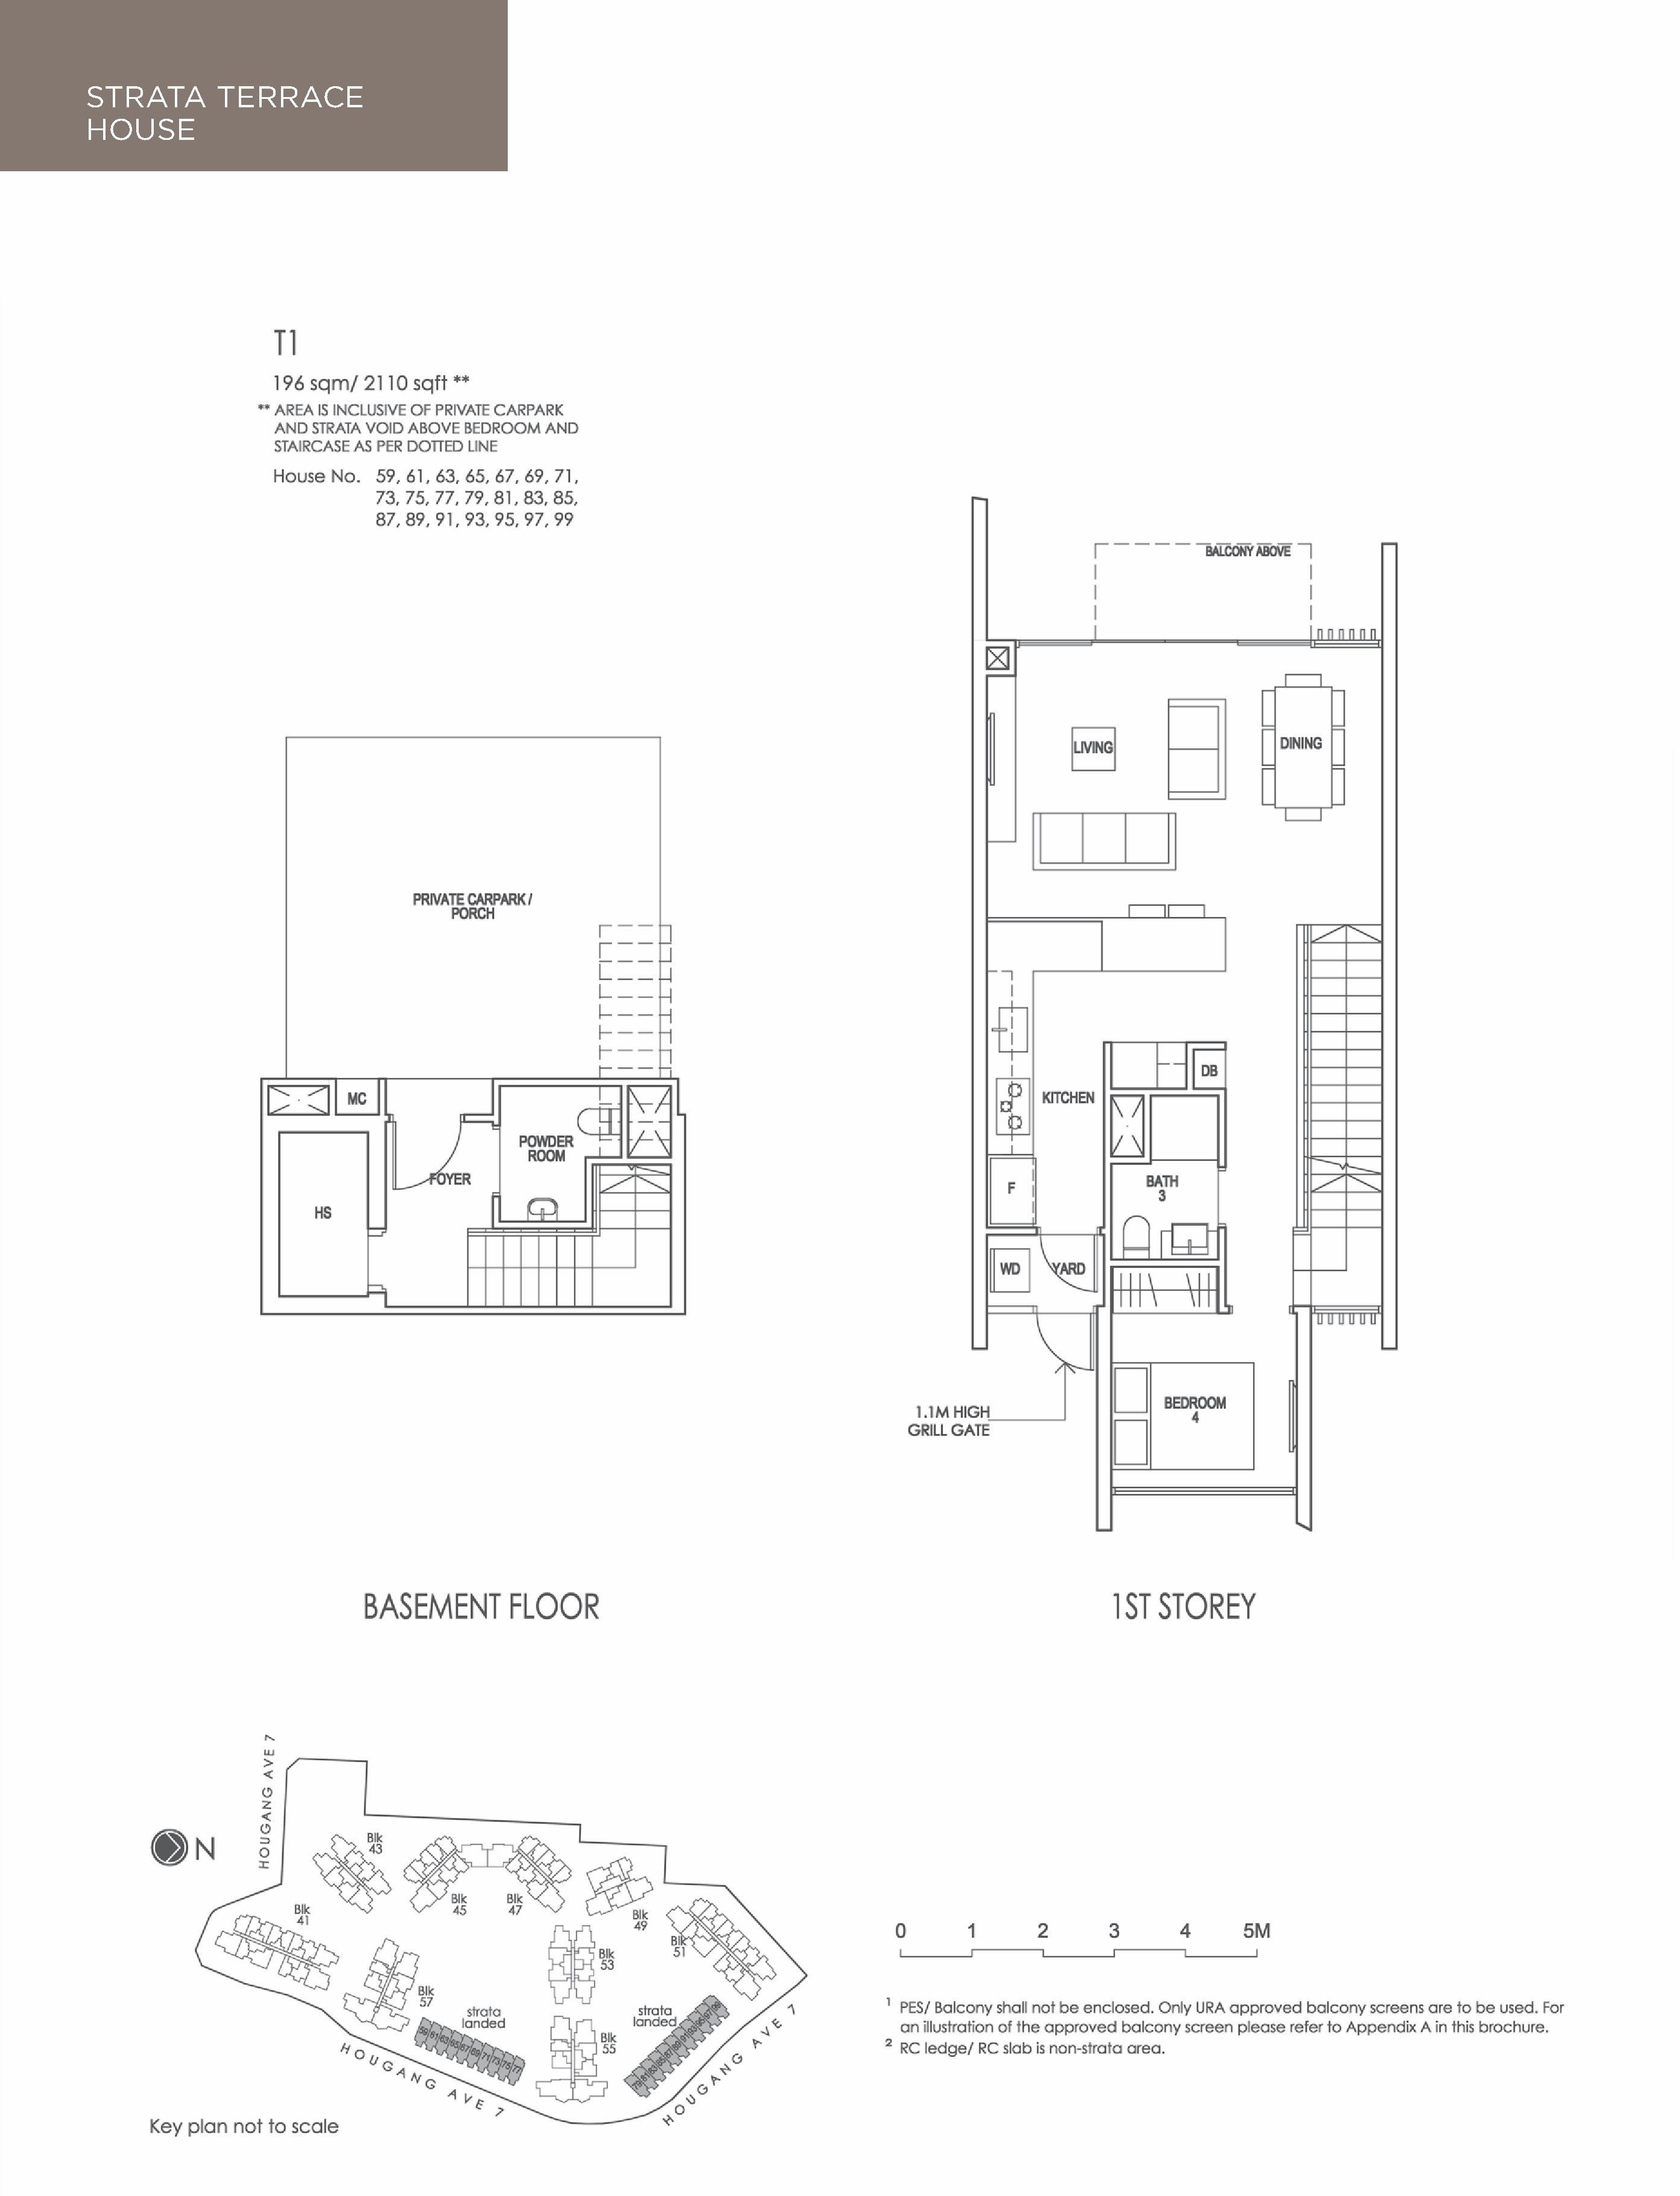 Riverfront Residences Strata Landed Basement And 1st Storey Type T1 Floor Plan